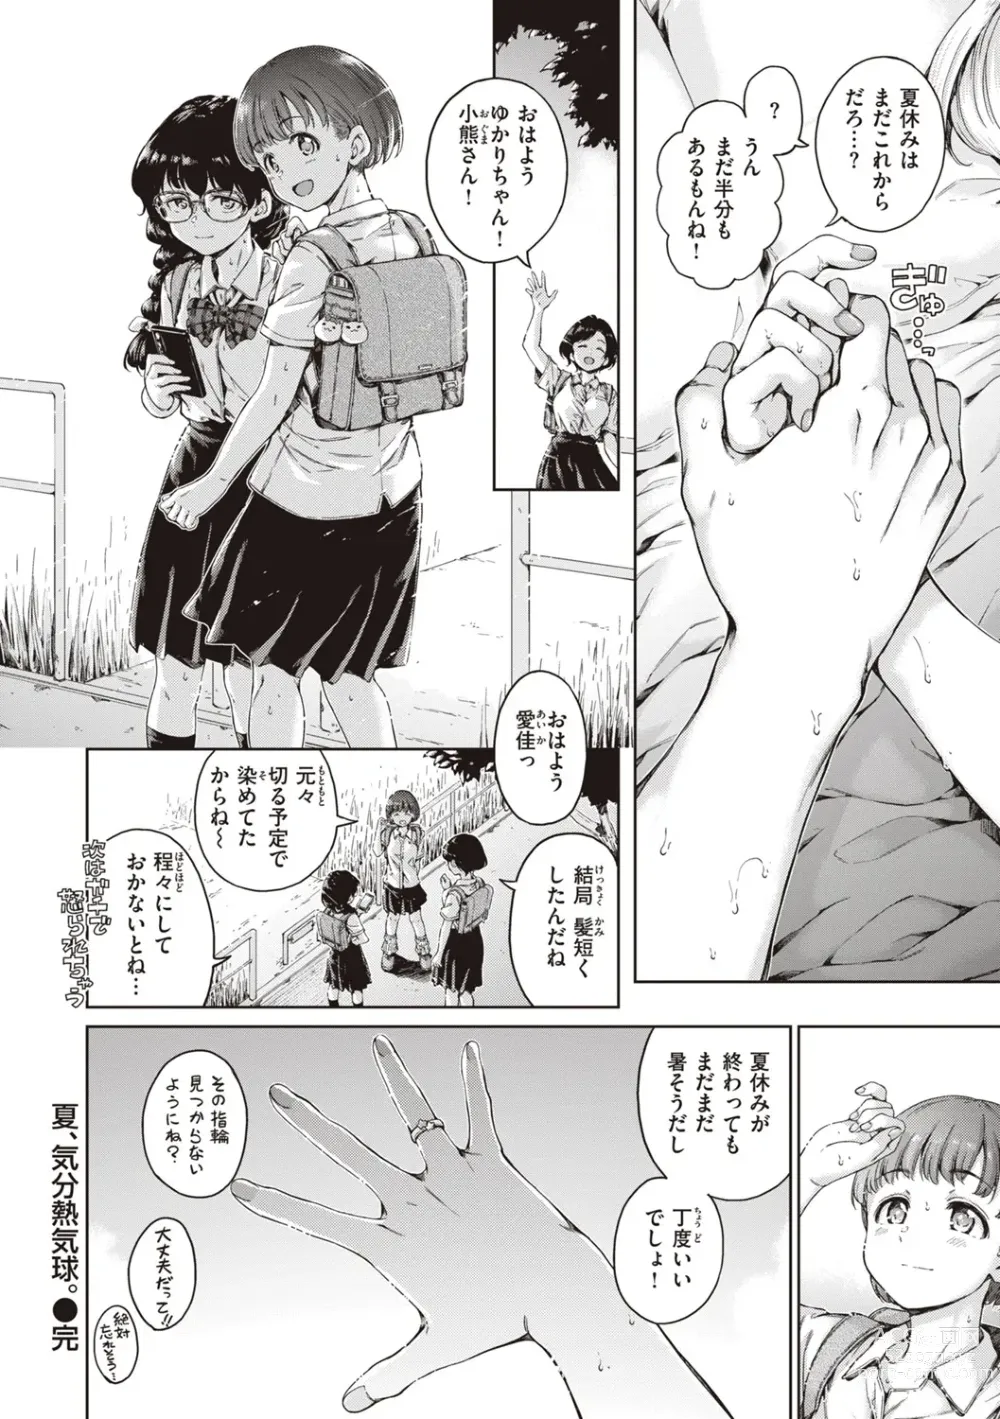 Page 30 of manga Wataame to Caramel - Cotton Candy and Caramel